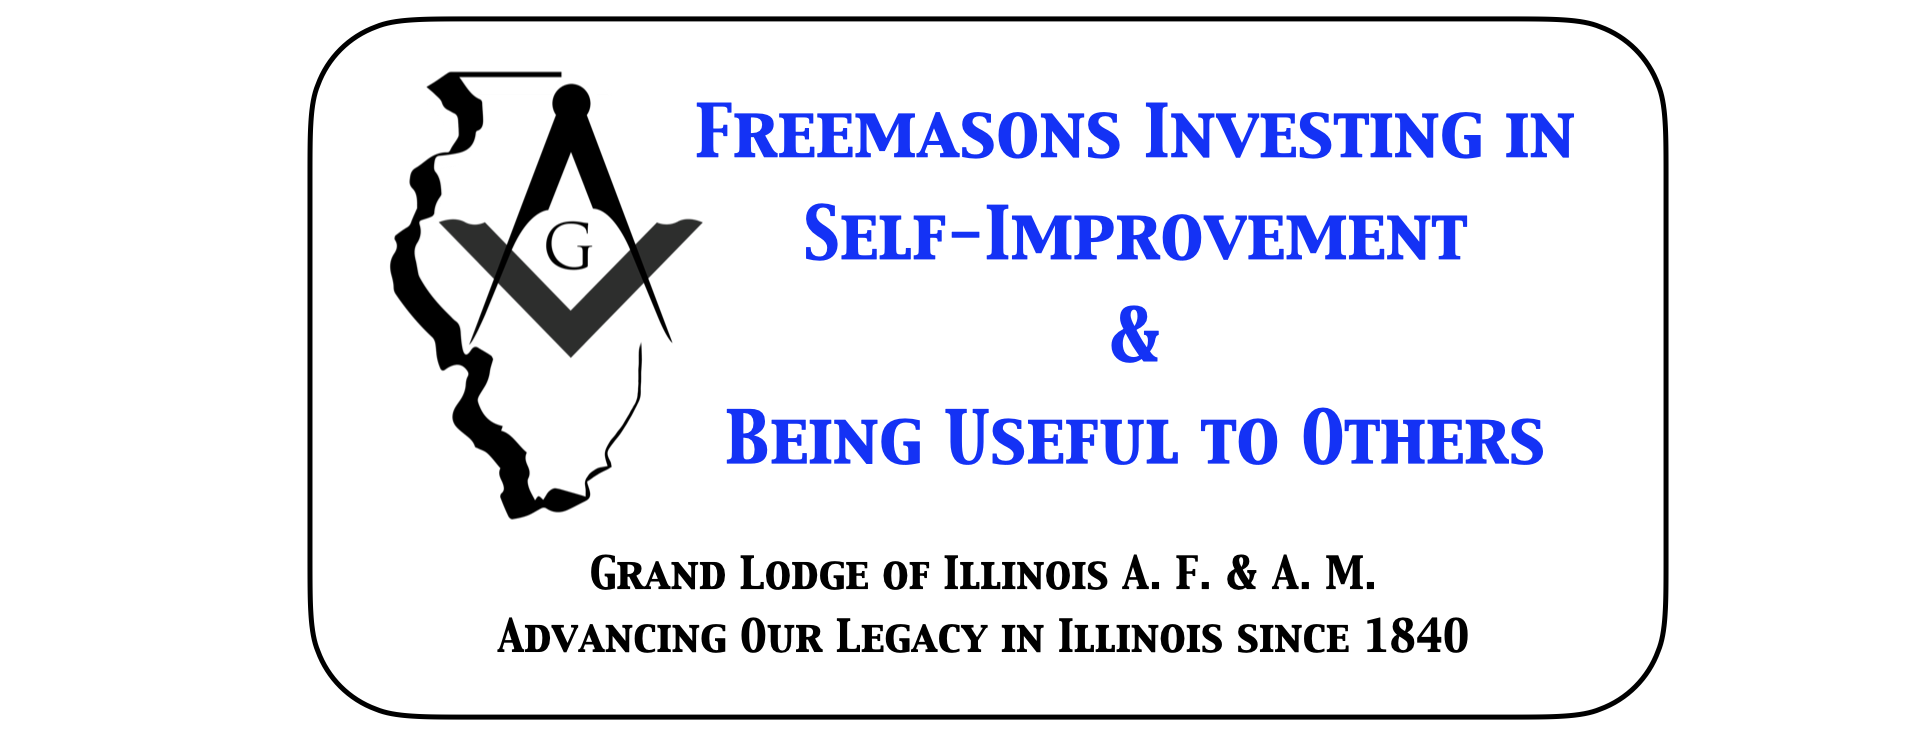 The Grand Lodge of Illinois is committed to the Freemasons of Illinois and their communities, which is why they have one of the largest charity outreach programs in the nation. Learn more about the IMCAP today!